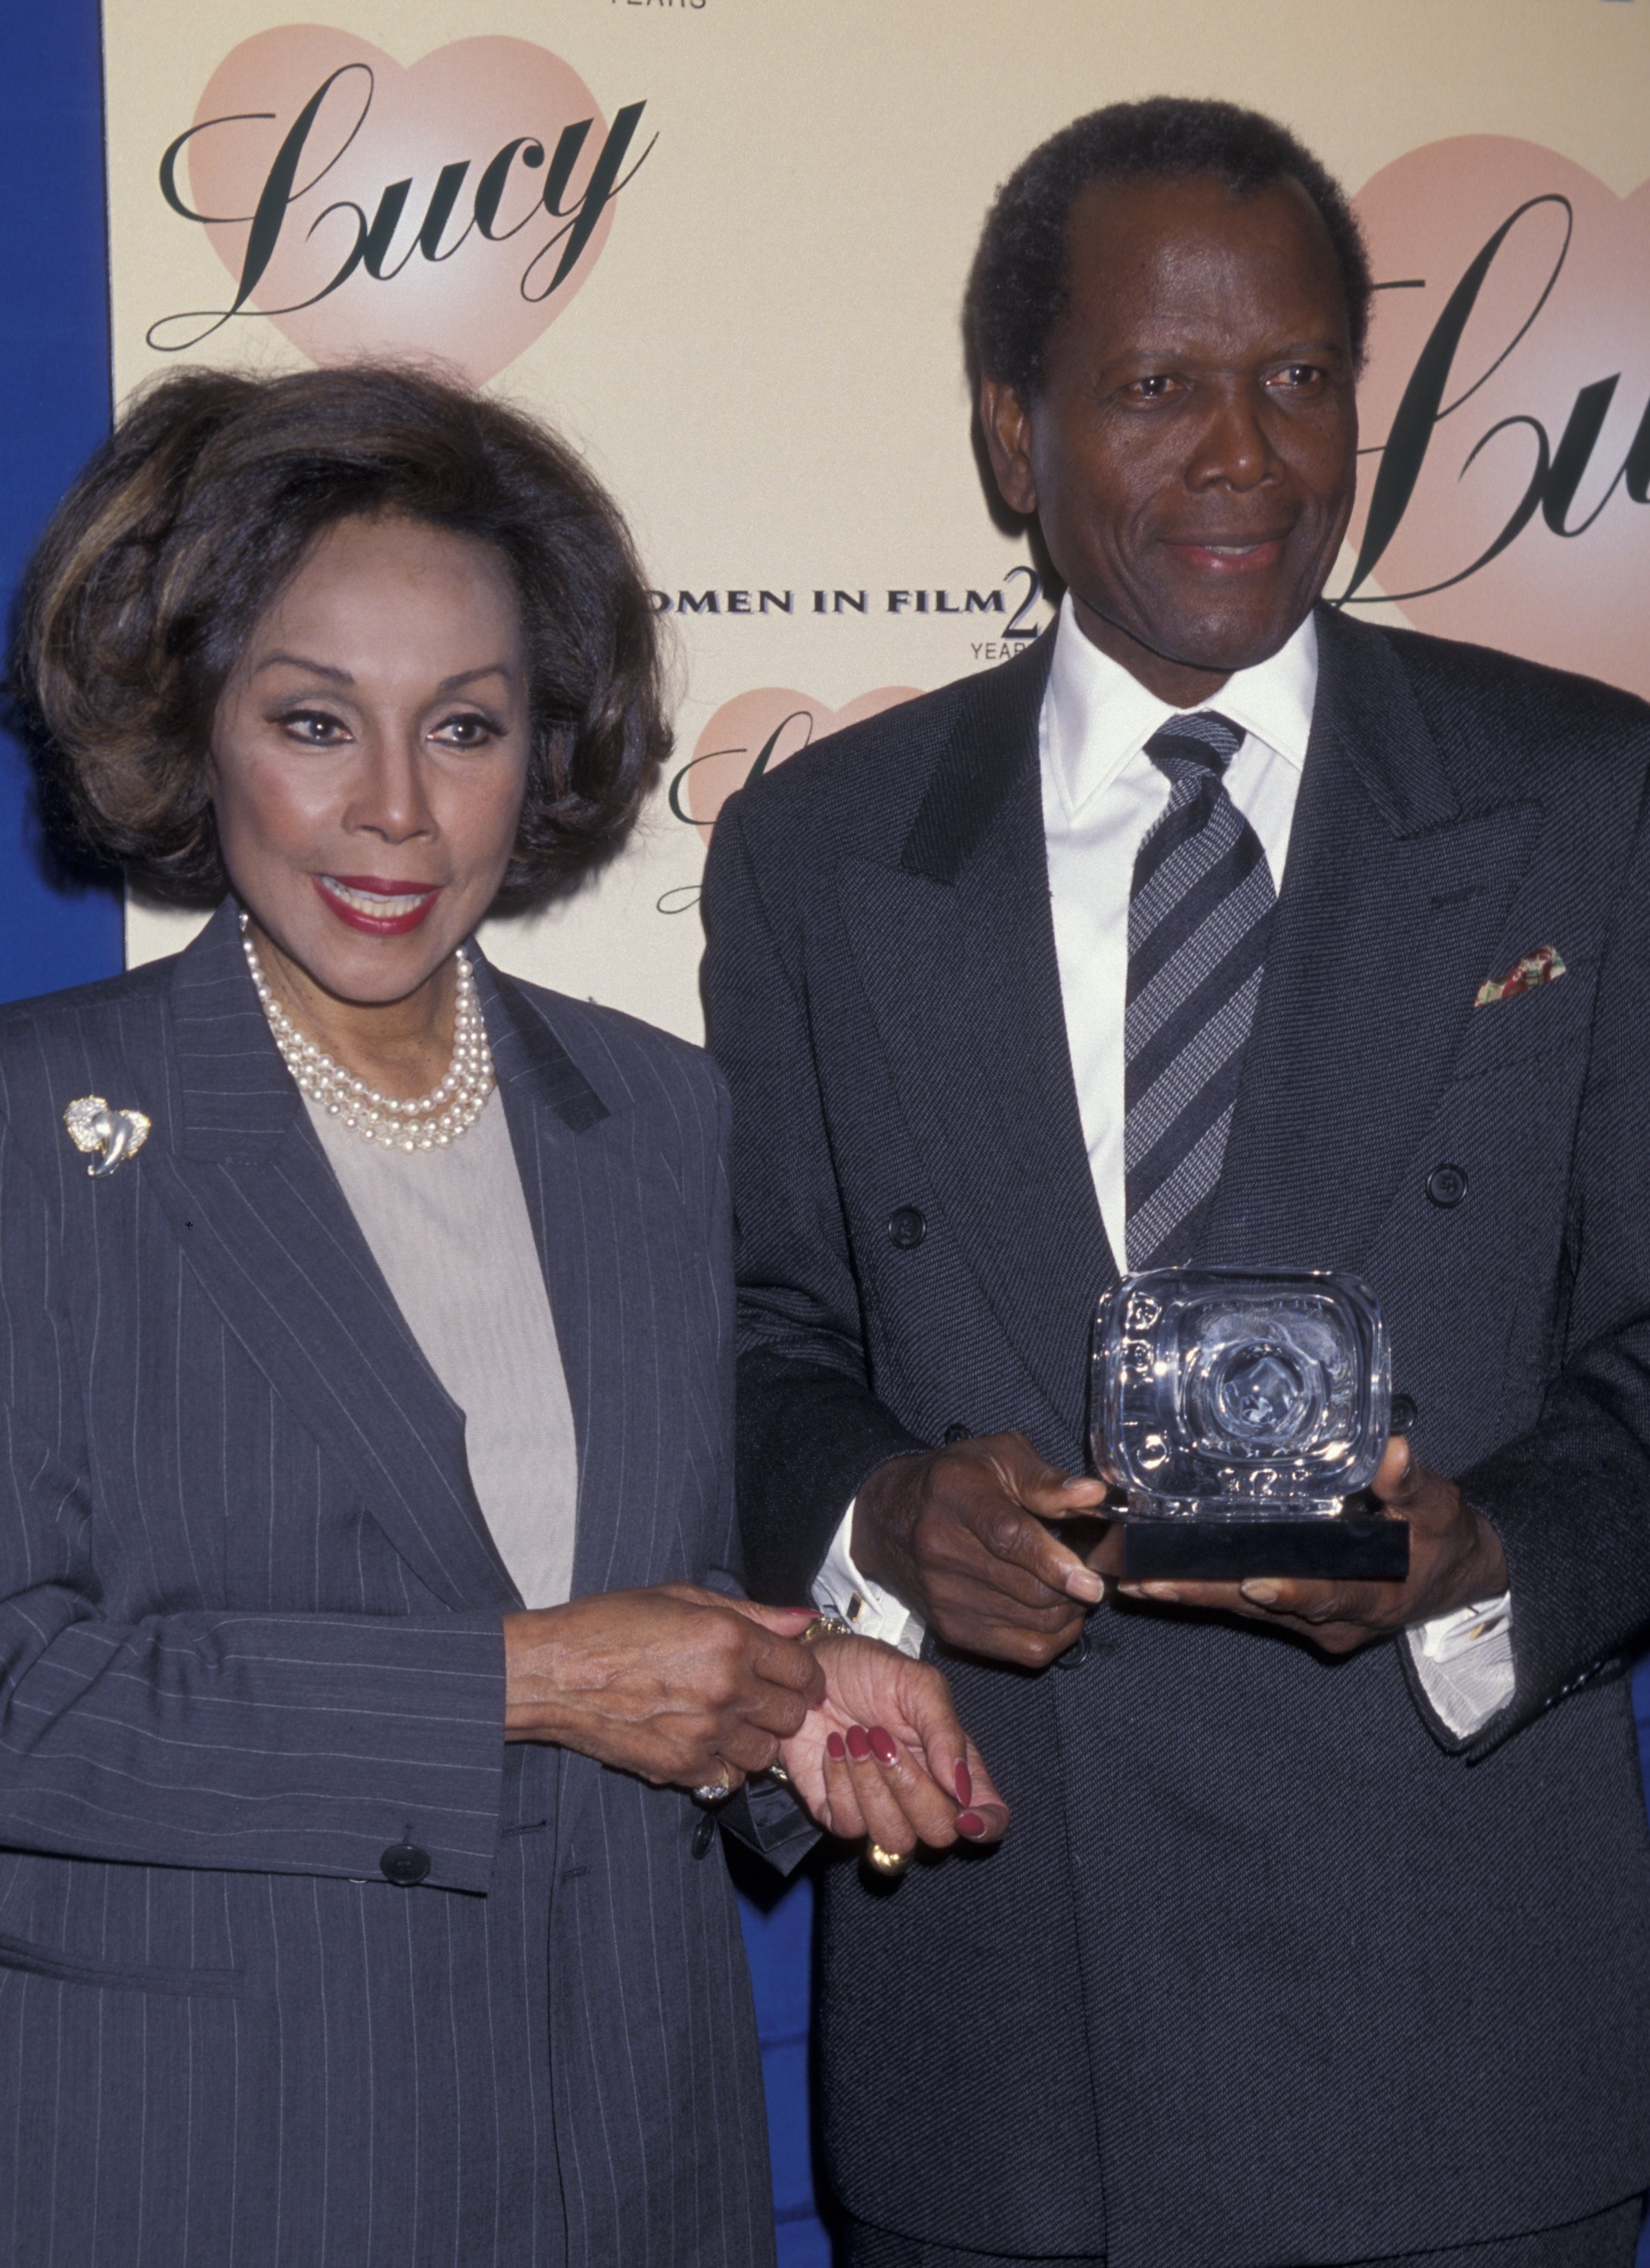 Diahann Carroll and Sidney Poitier a the Fifth Annual Women in Film Lucy Awards on September 12, 1998 in Beverly Hills, California. | Photo: Getty Images